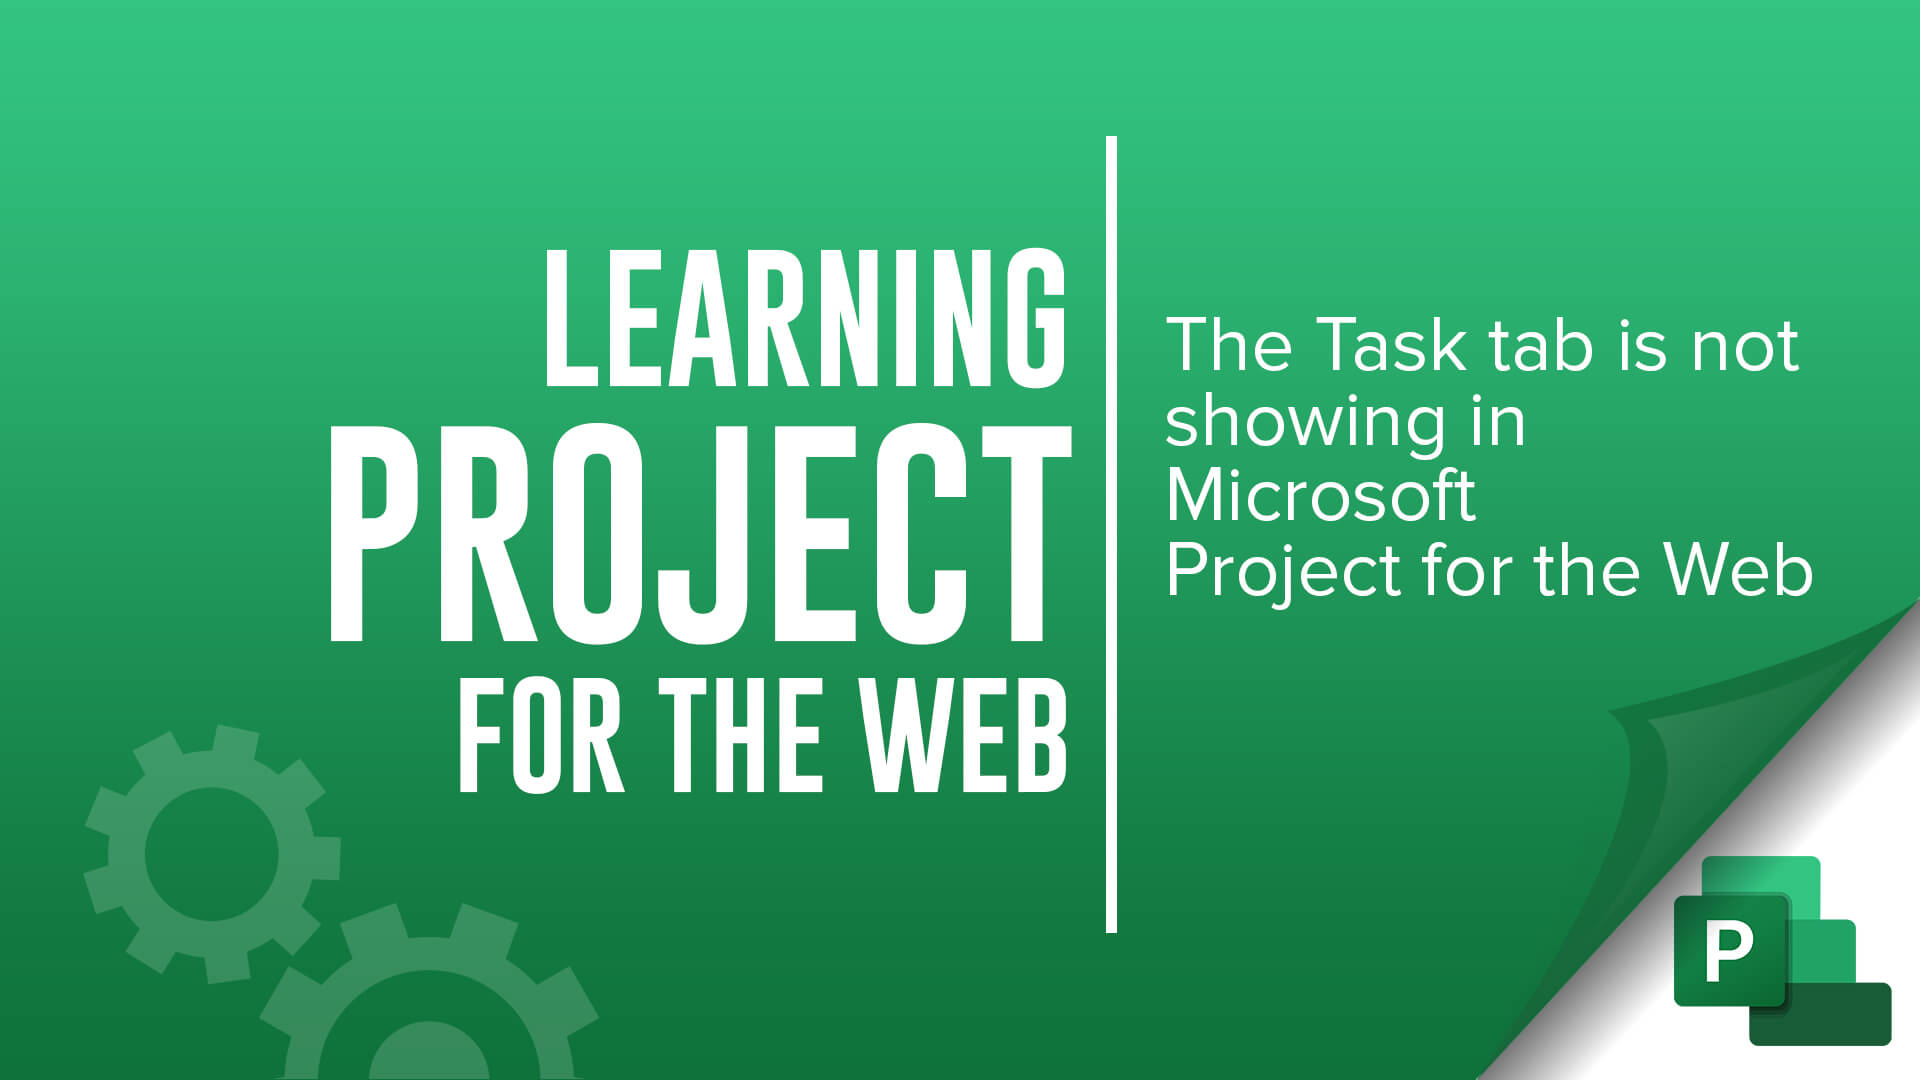 learning Project for the Web - The Task tab is not showing in Microsoft Project for the Web